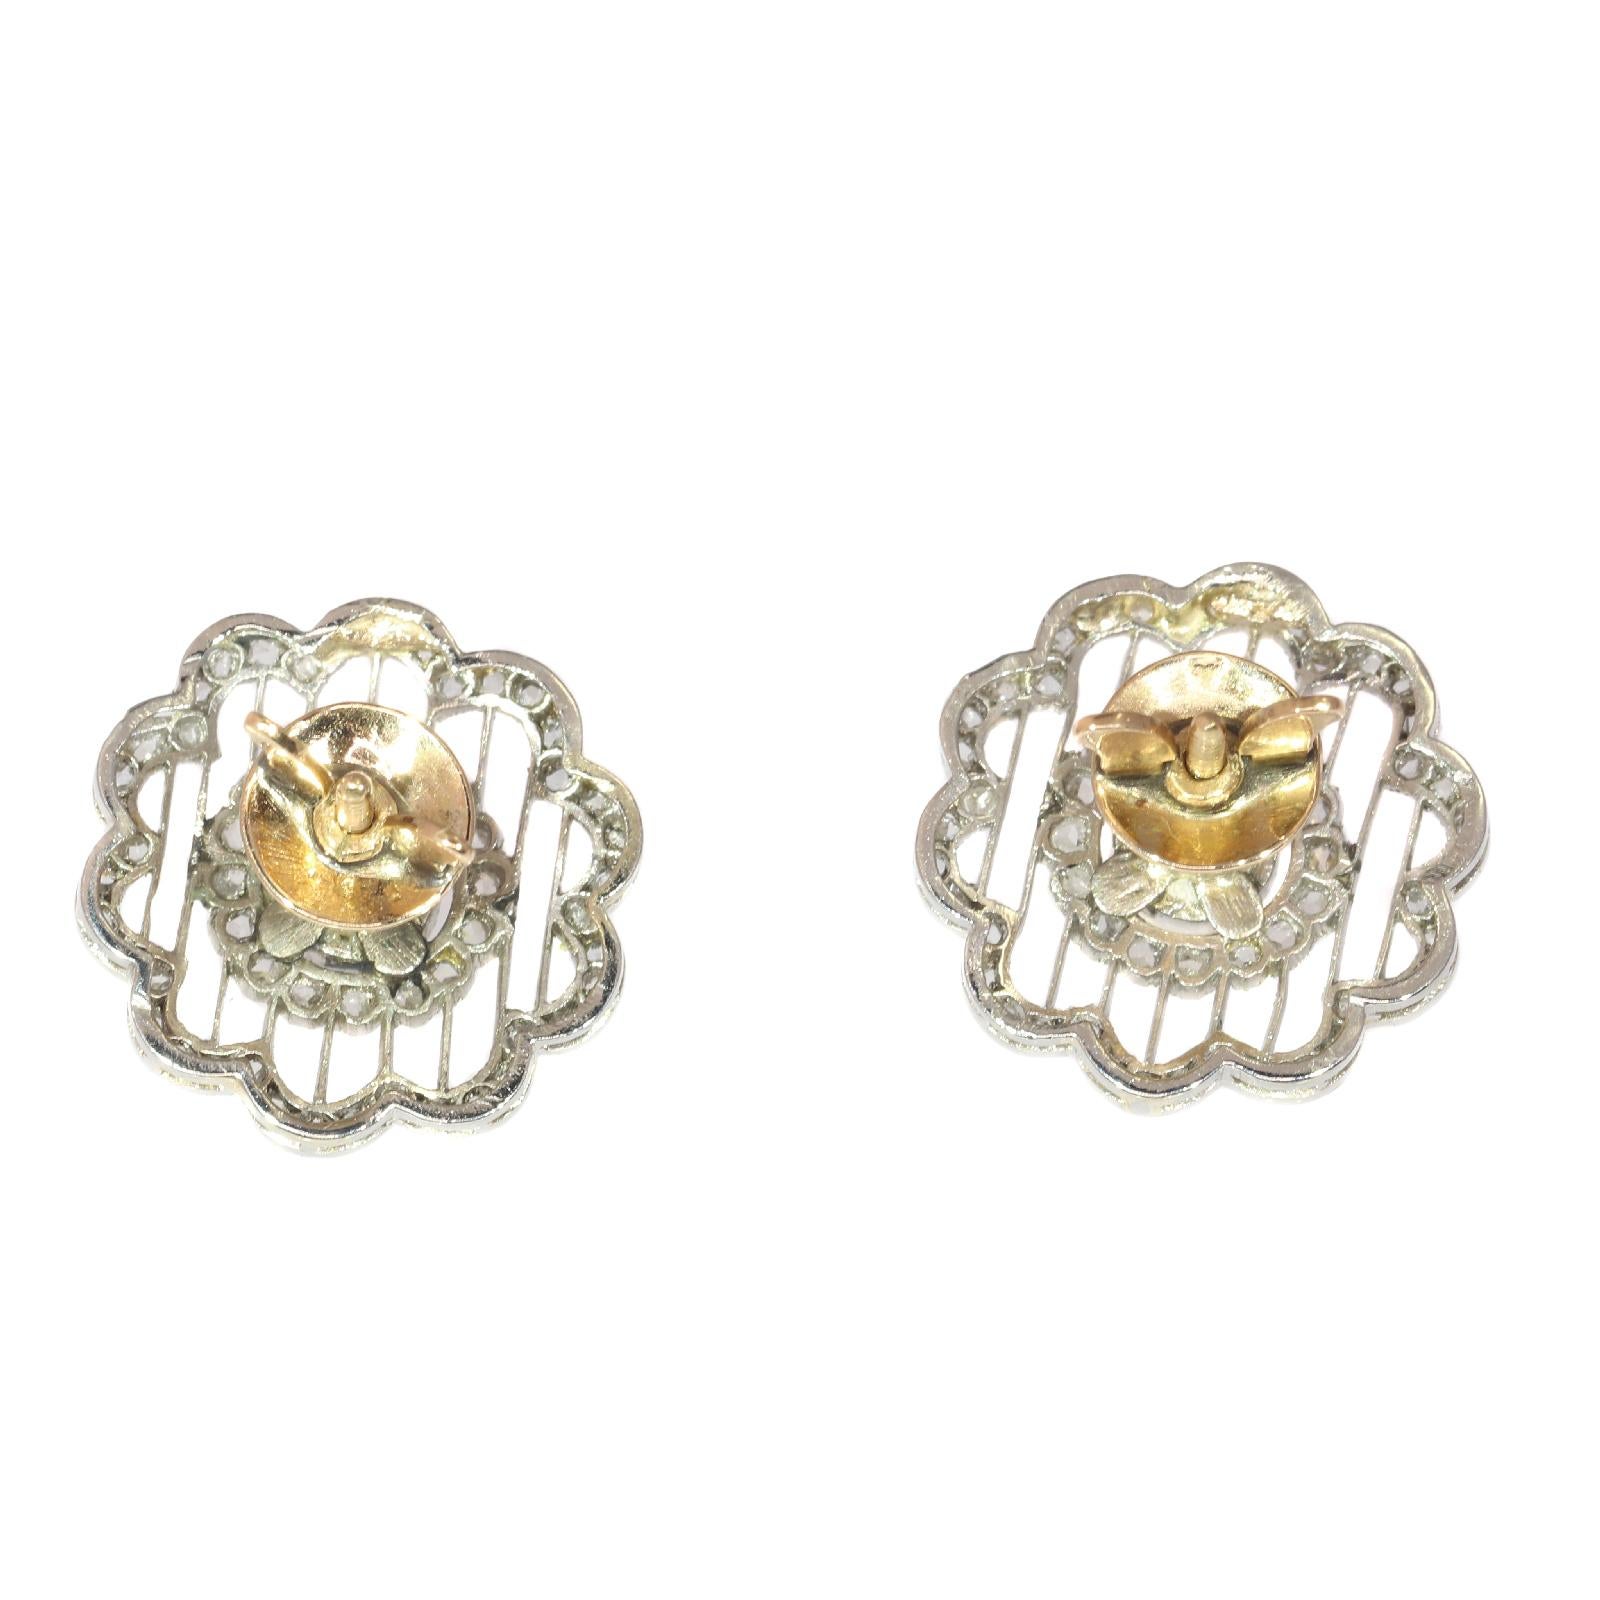 Women's Vintage Earrings Dutch Edwardian Platinum Set with 112 Rose Cuts and a Pearl For Sale